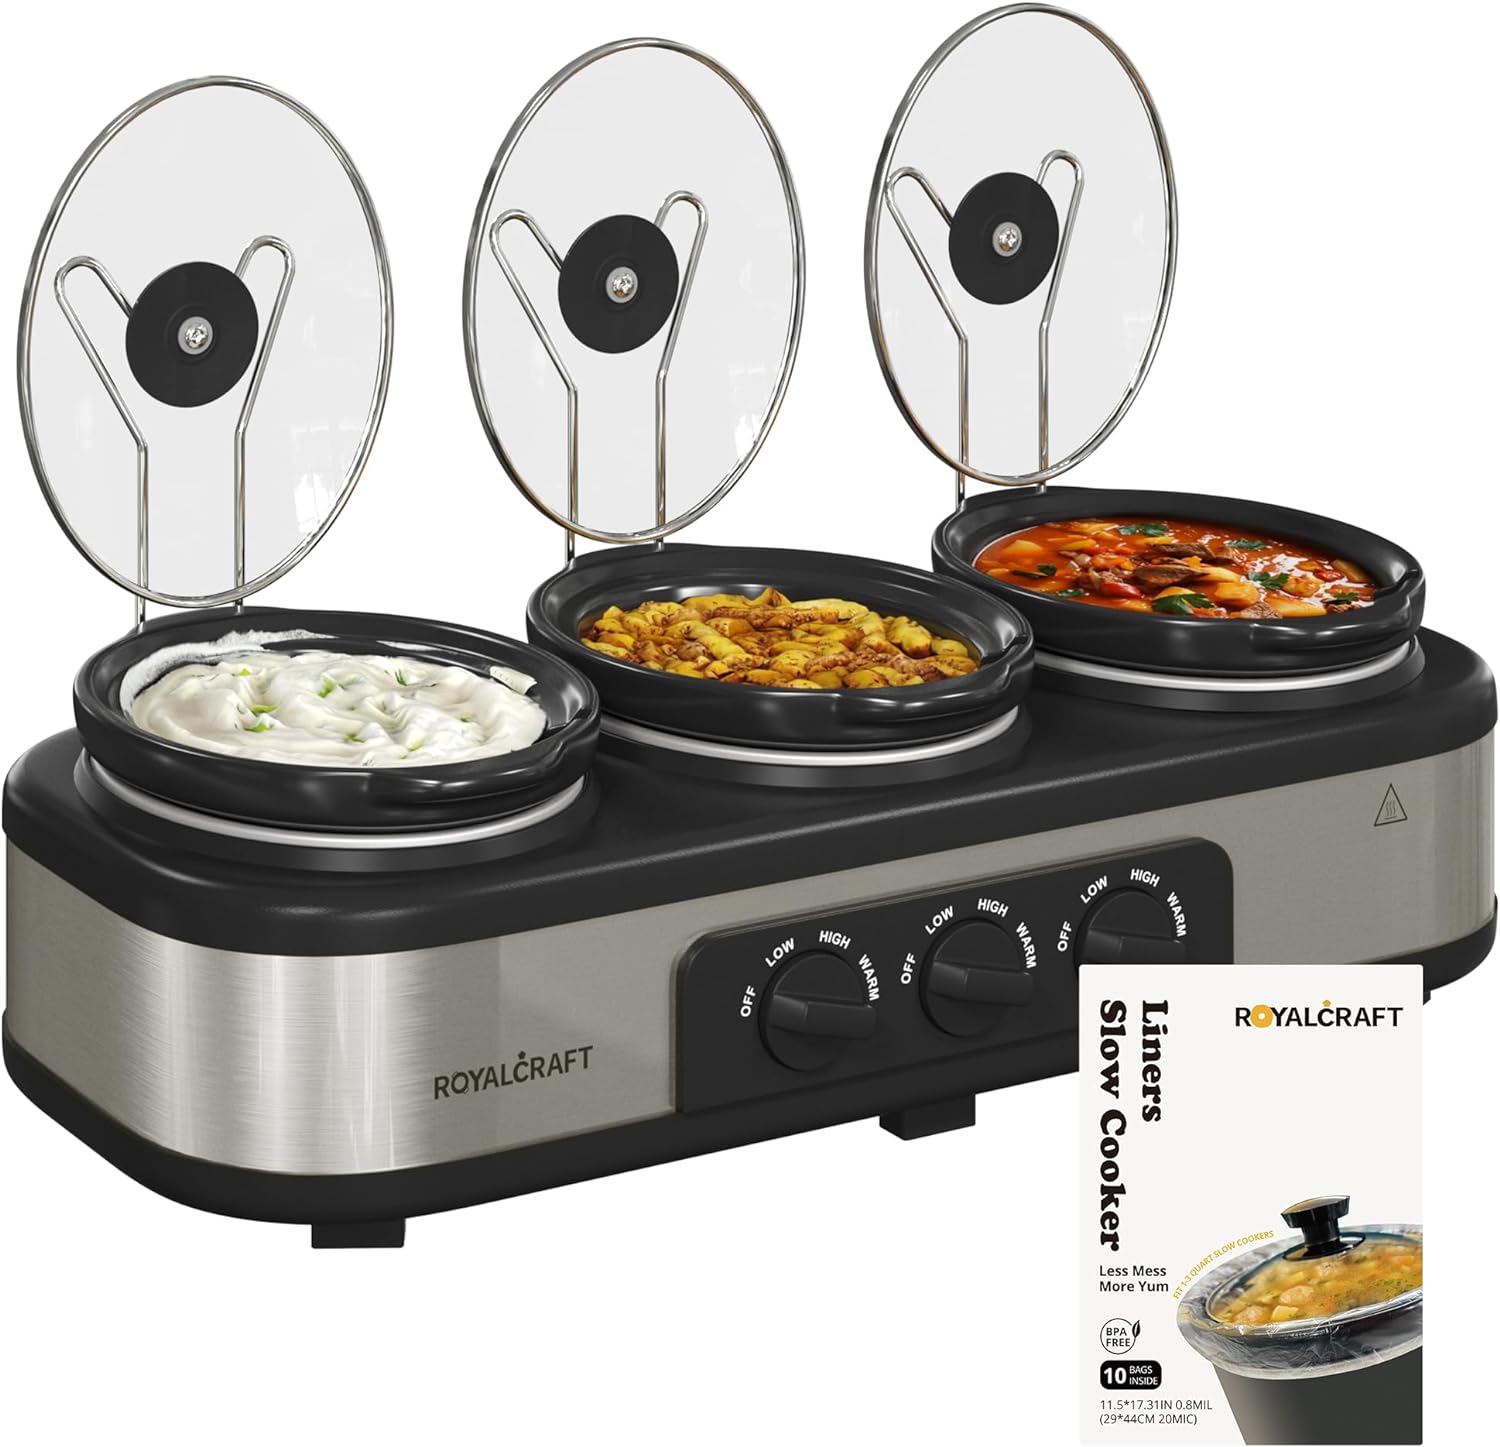 Royalcraft Slow Cooker with 10 Cooking Liners, 3 in 1 Buffet Servers Dips Pot, Food Warmers for Parties with 3 Spoons, Lid Rests, Removable Oval Ceramic Pots, Total 4.5QT Silver